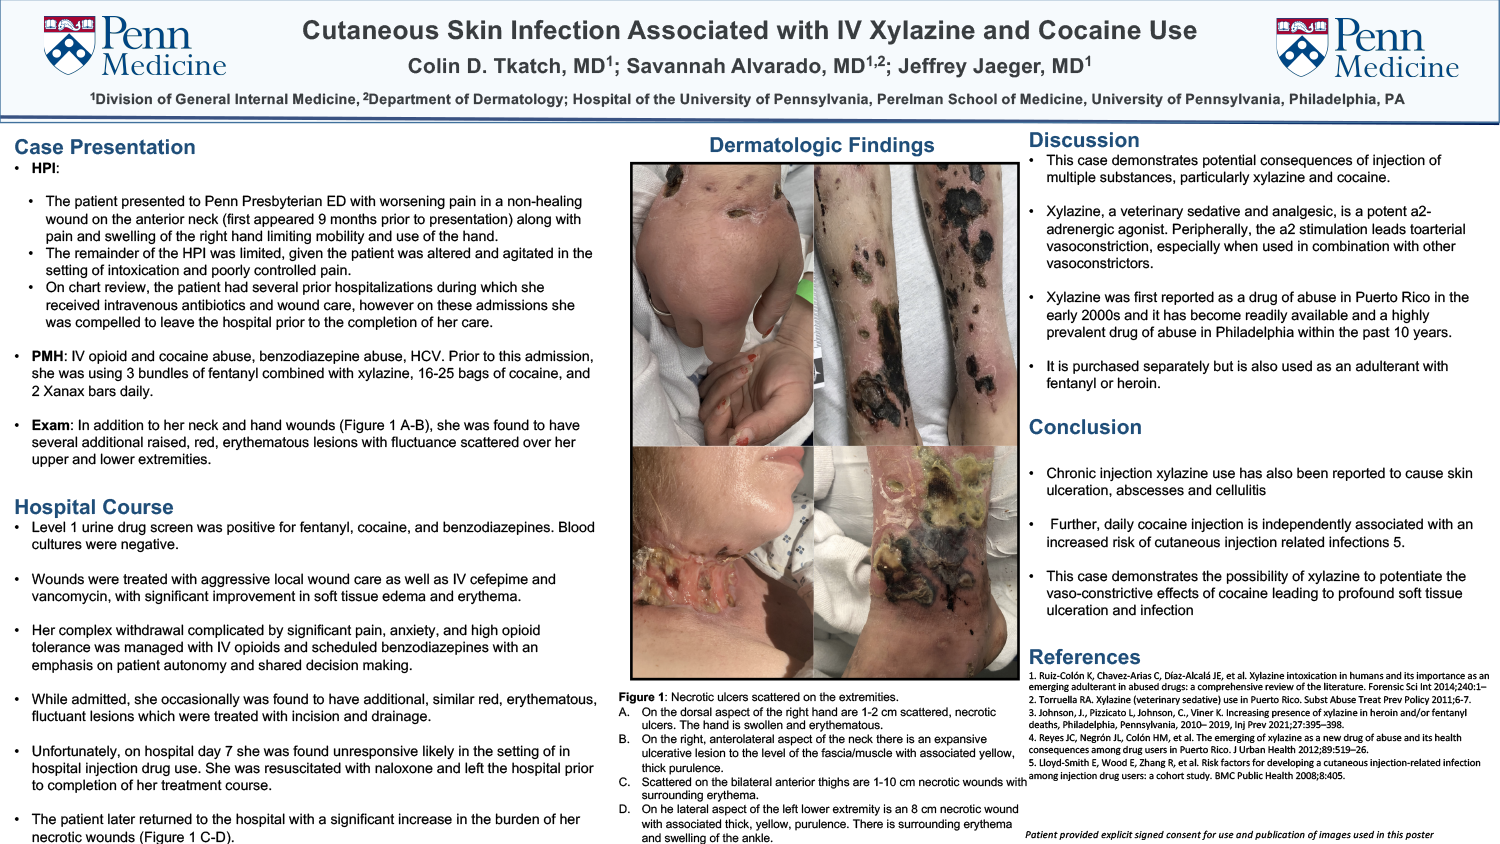 Colin Tkatch - PAS-30-Cutaneous-Skin-Infection-Associated-with-IV-Xylazine-and-Cocaine-Use